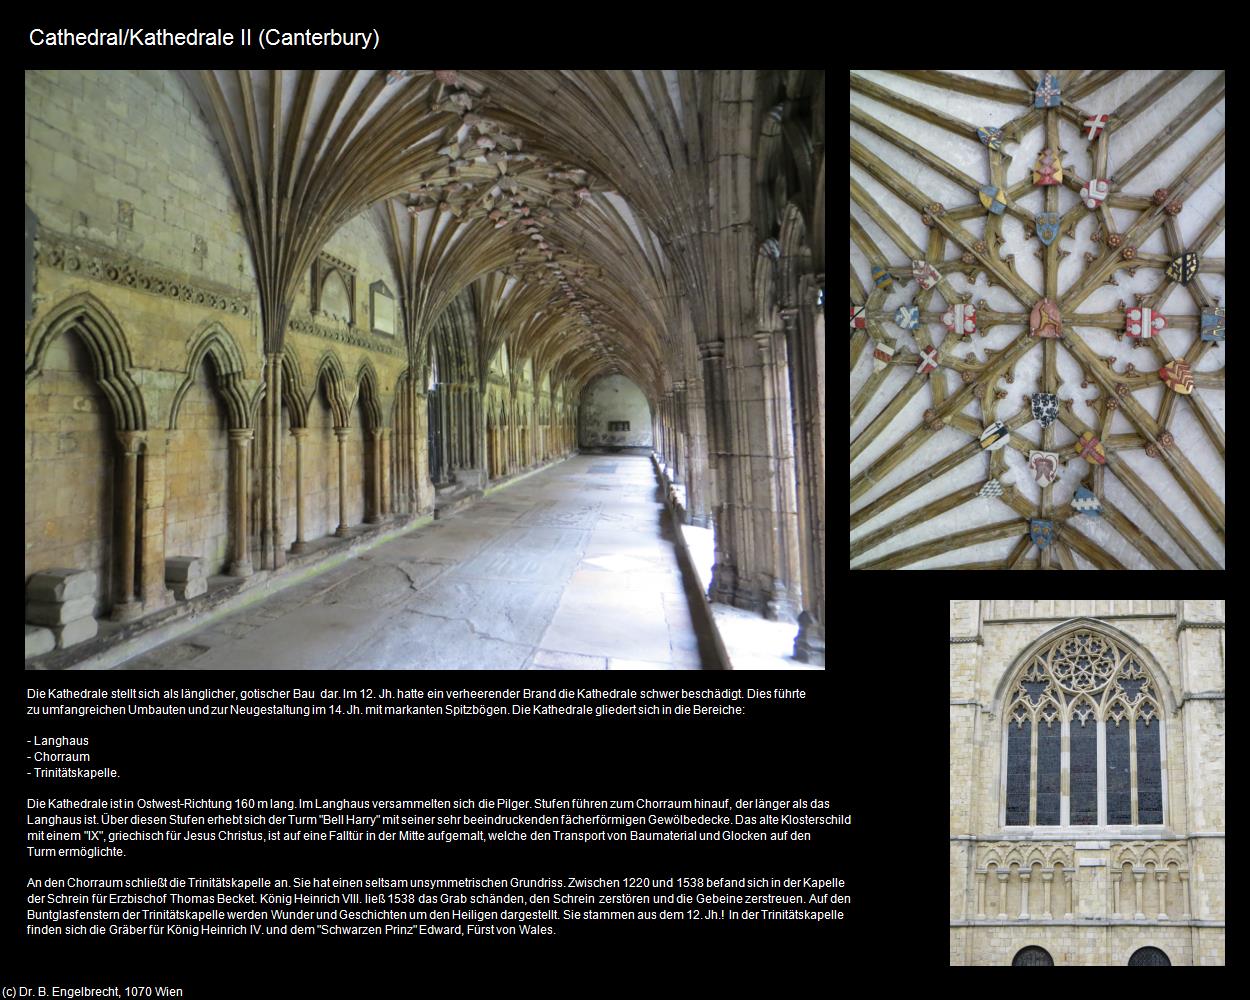 Cathedral/Kathedrale II (Canterbury, England) in Kulturatlas-ENGLAND und WALES